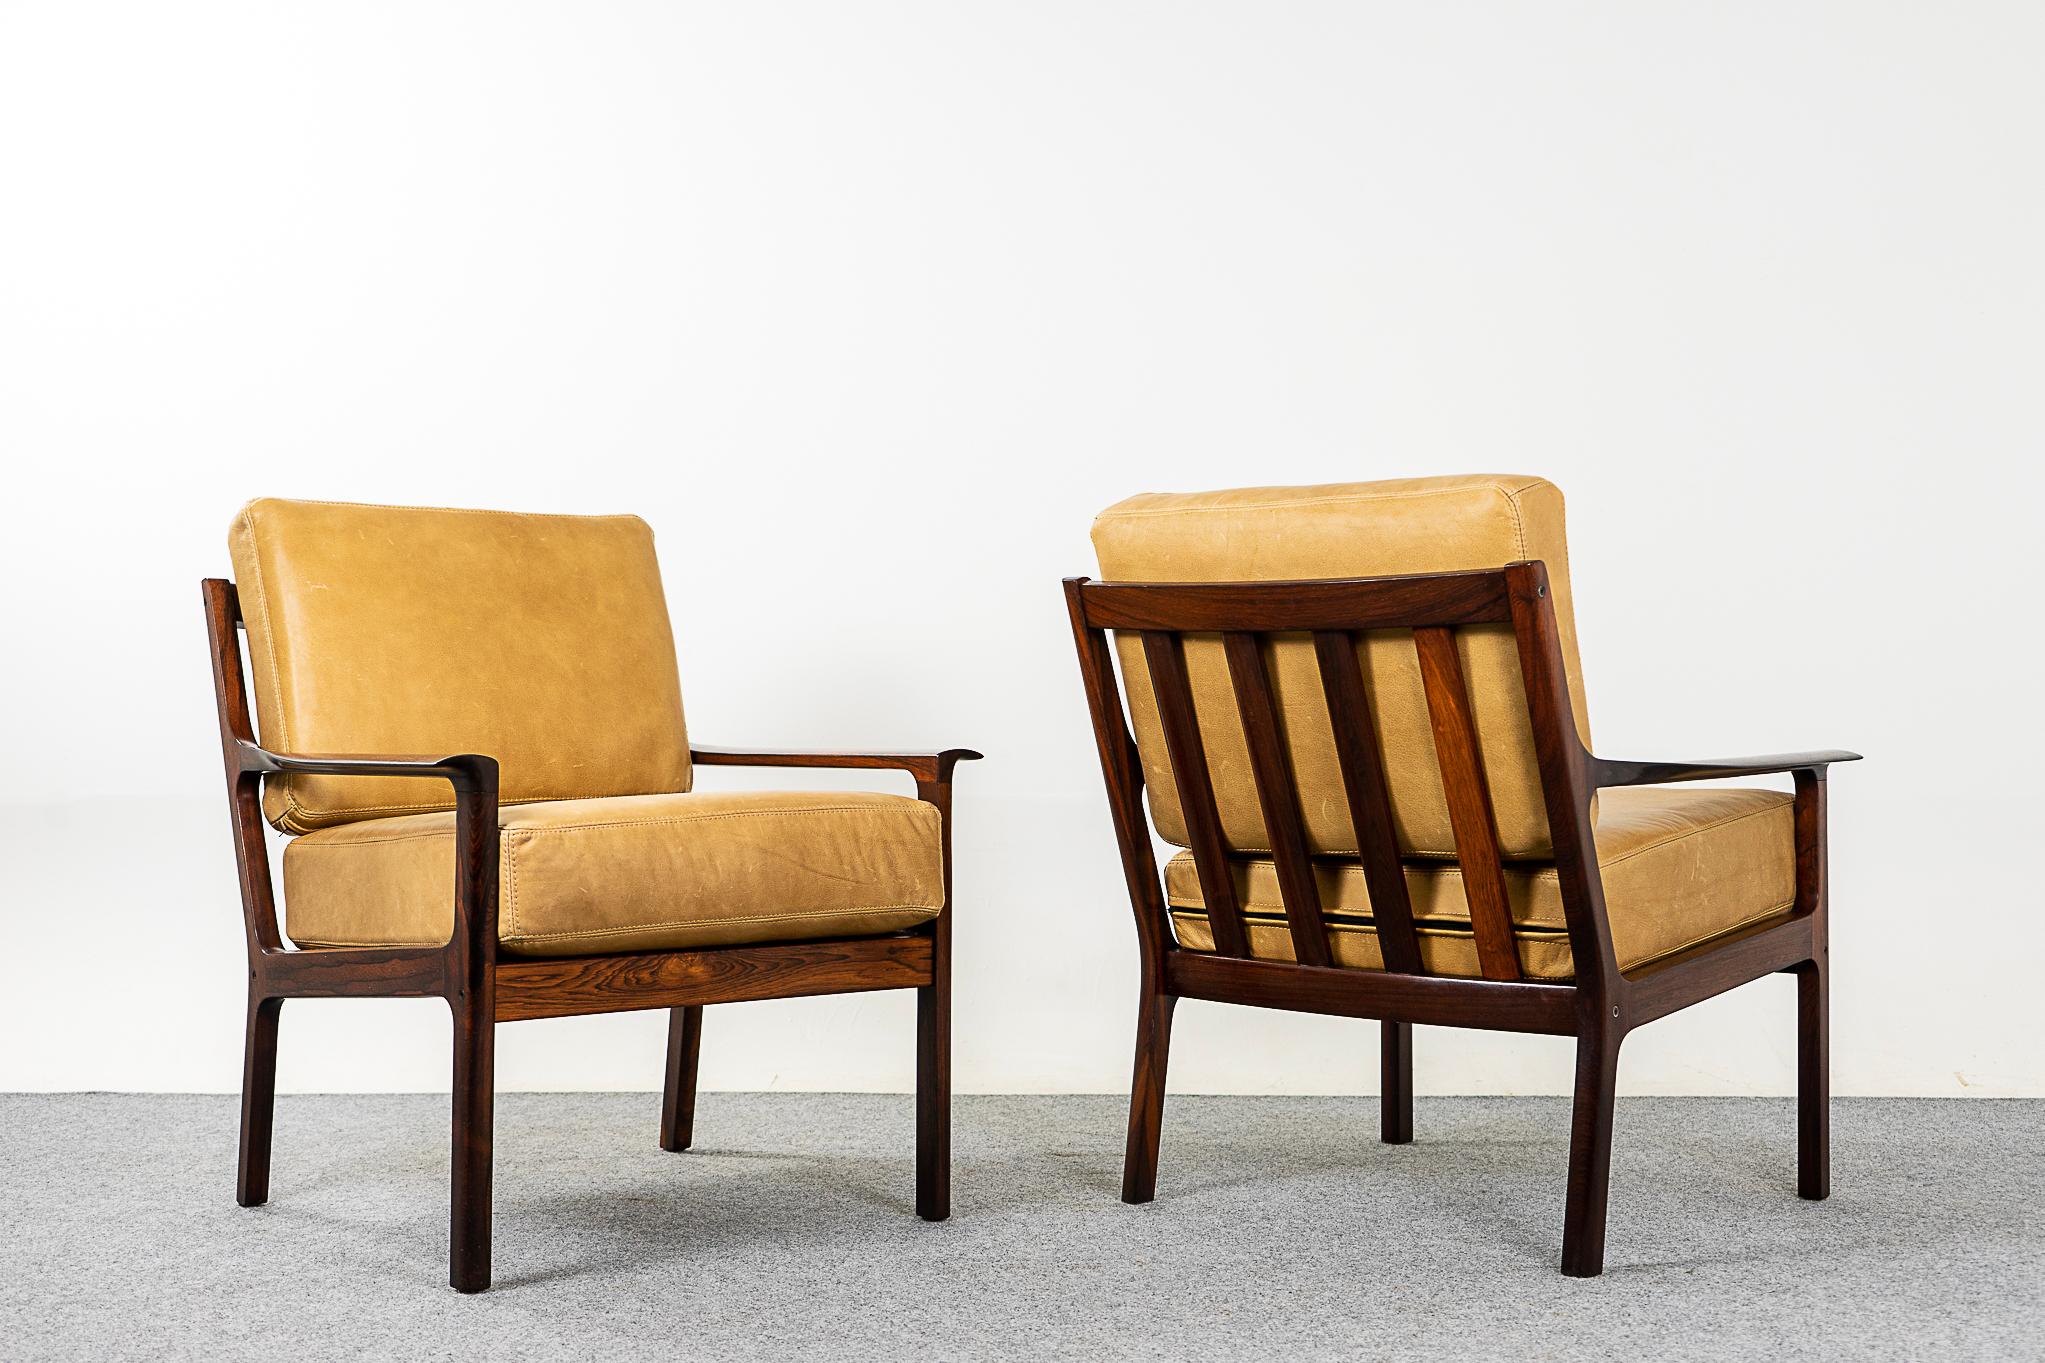 Rosewood & leather Norwegian lounge chair pair by Frederik A. Kayser, circa 1960's. Sculpted solid rosewood frames with stunning, graceful lines and slatted backrest. New buttery soft tan leather contrasts perfectly with frames. Comfortable, supple,